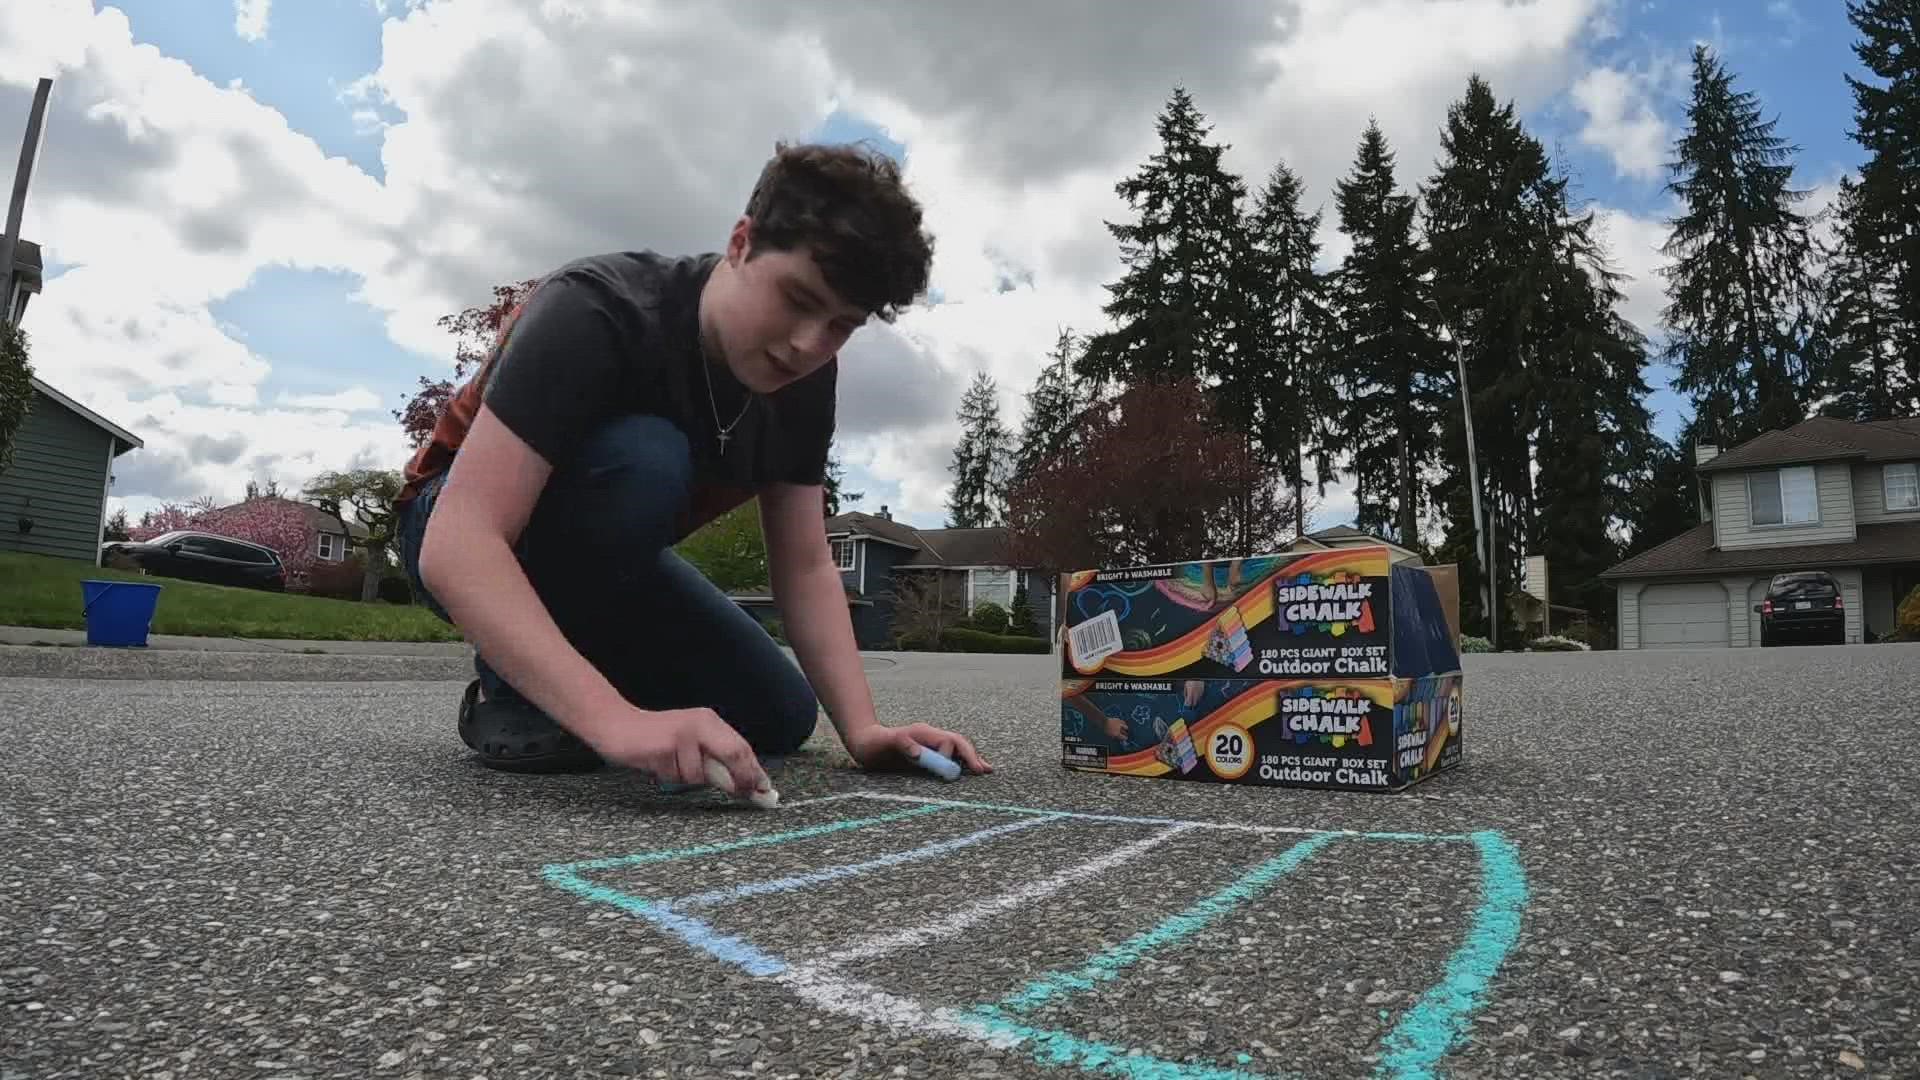 Sam Bowles has 1.4 million followers on TikTok for his visually satisfying sidewalk chalk and water creations.